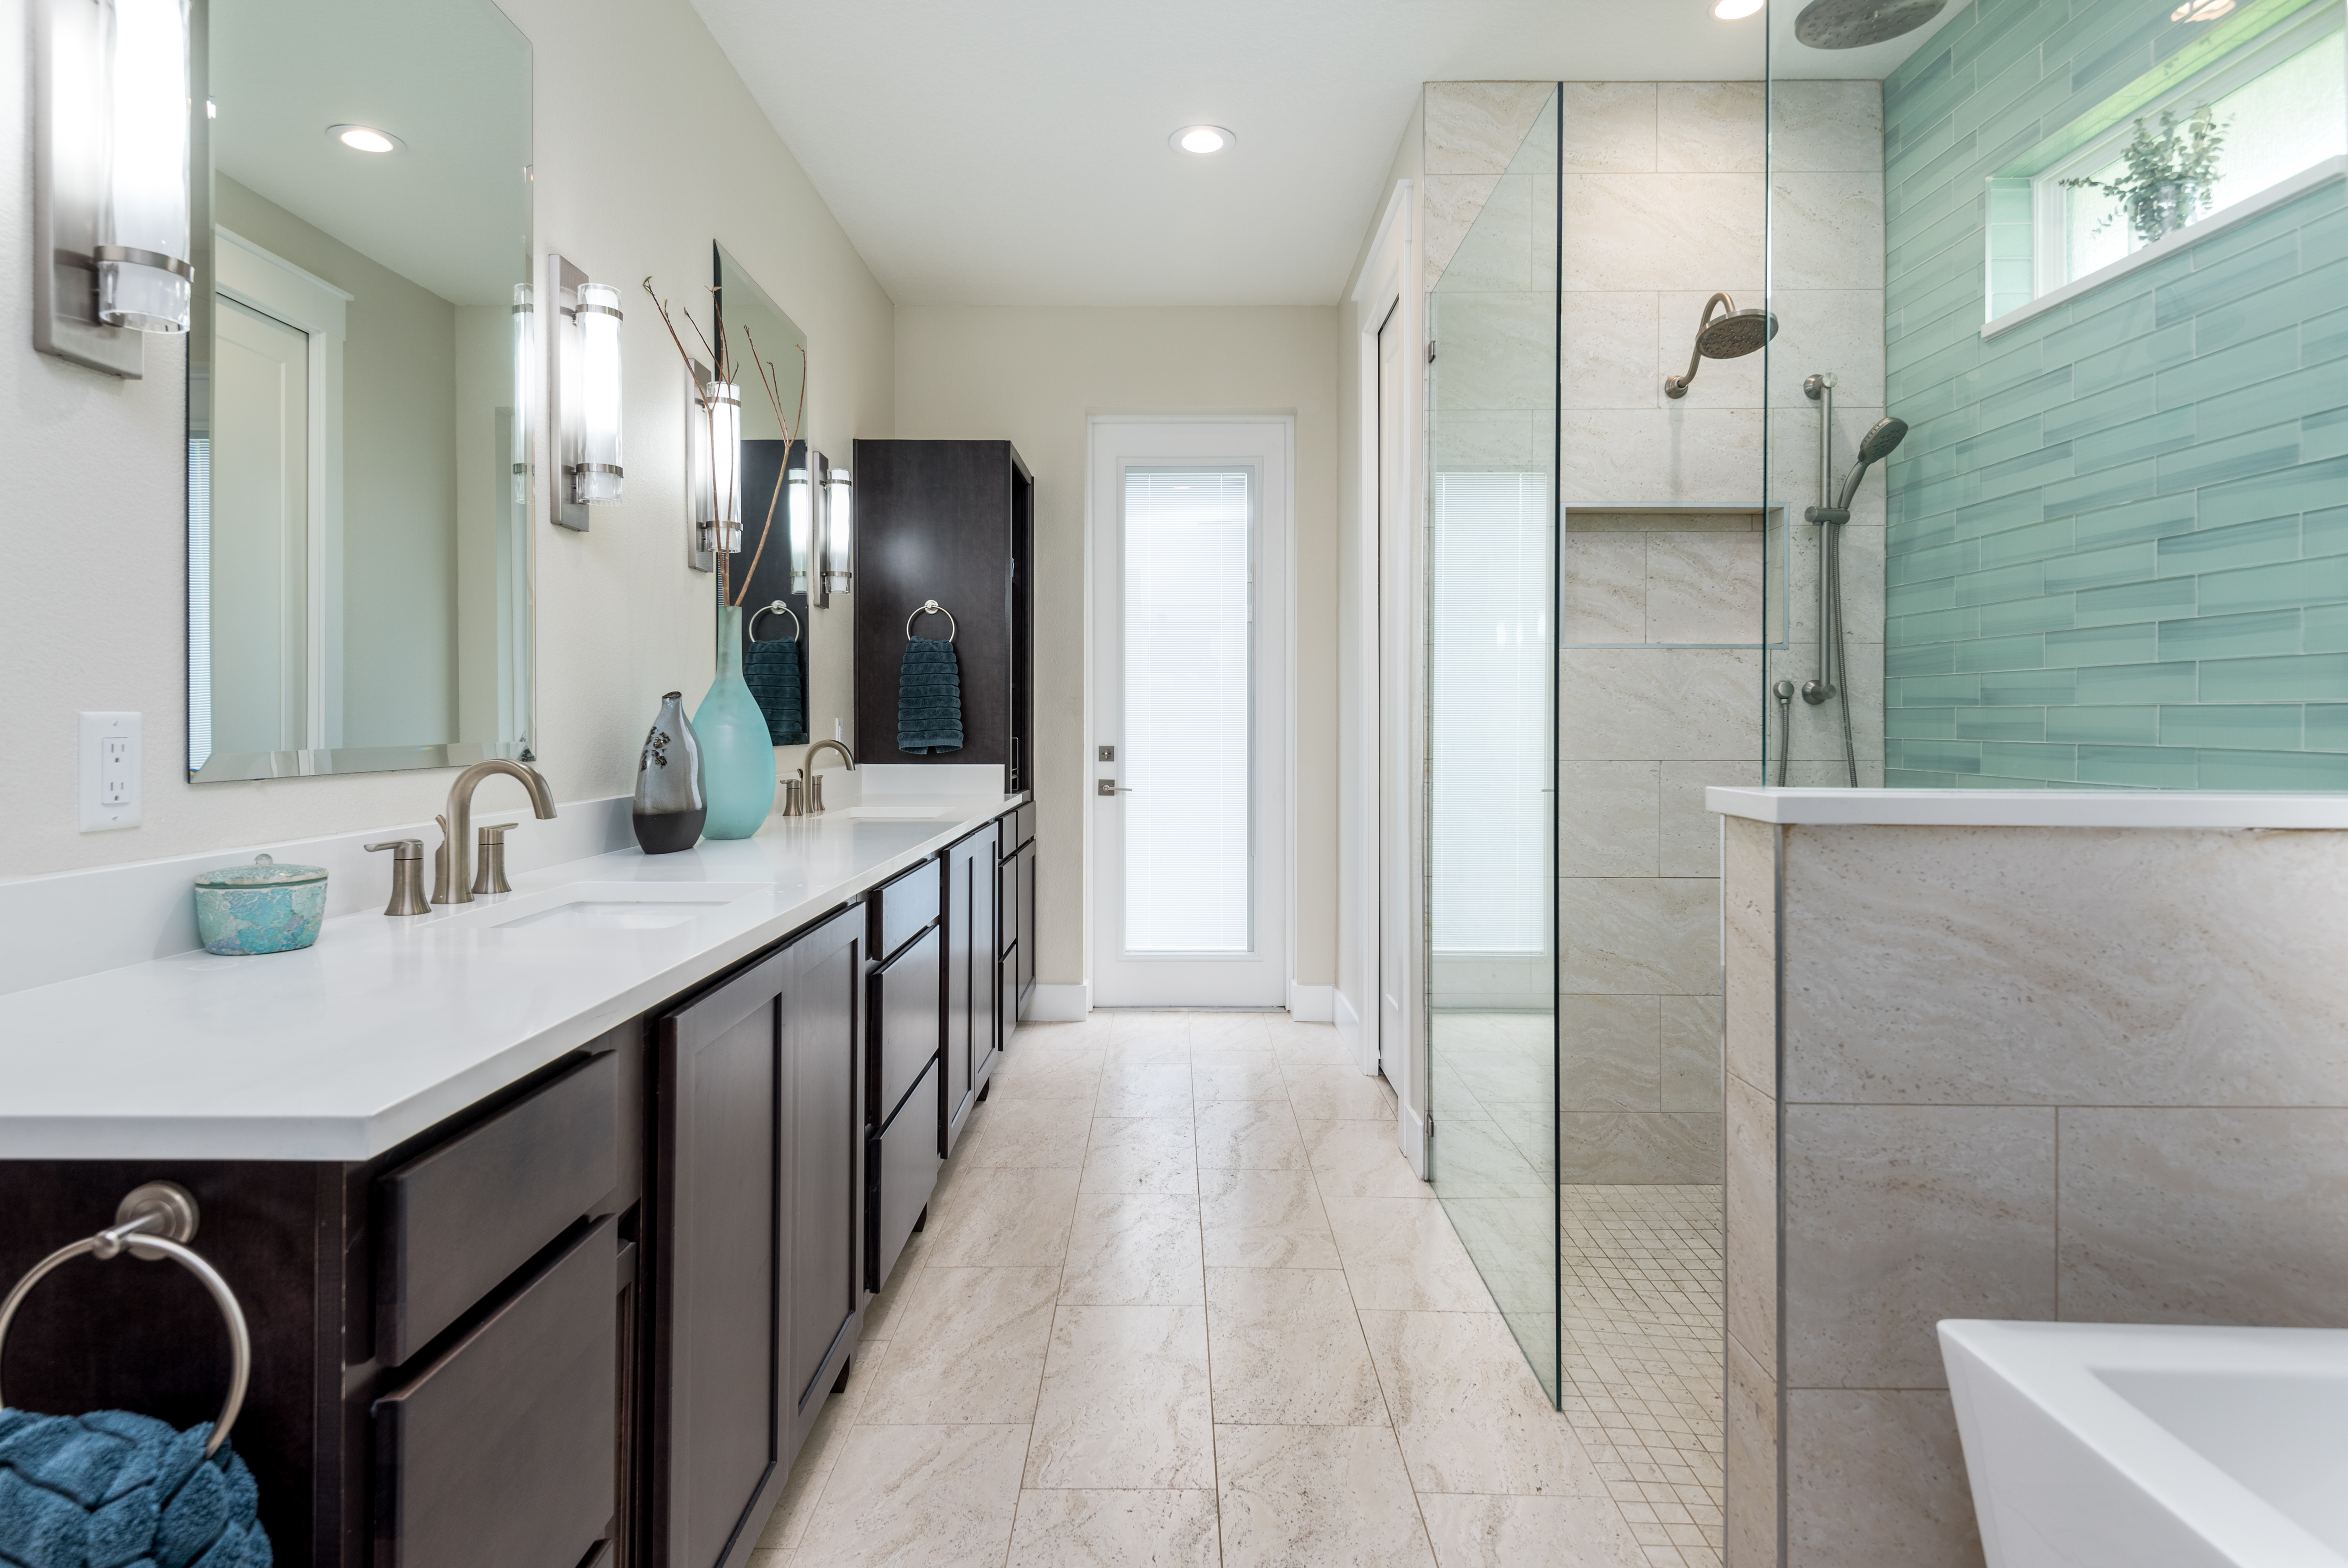 <span  class="uc_style_uc_tiles_grid_image_elementor_uc_items_attribute_title" style="color:#ffffff;">Master Bath - High Res</span>